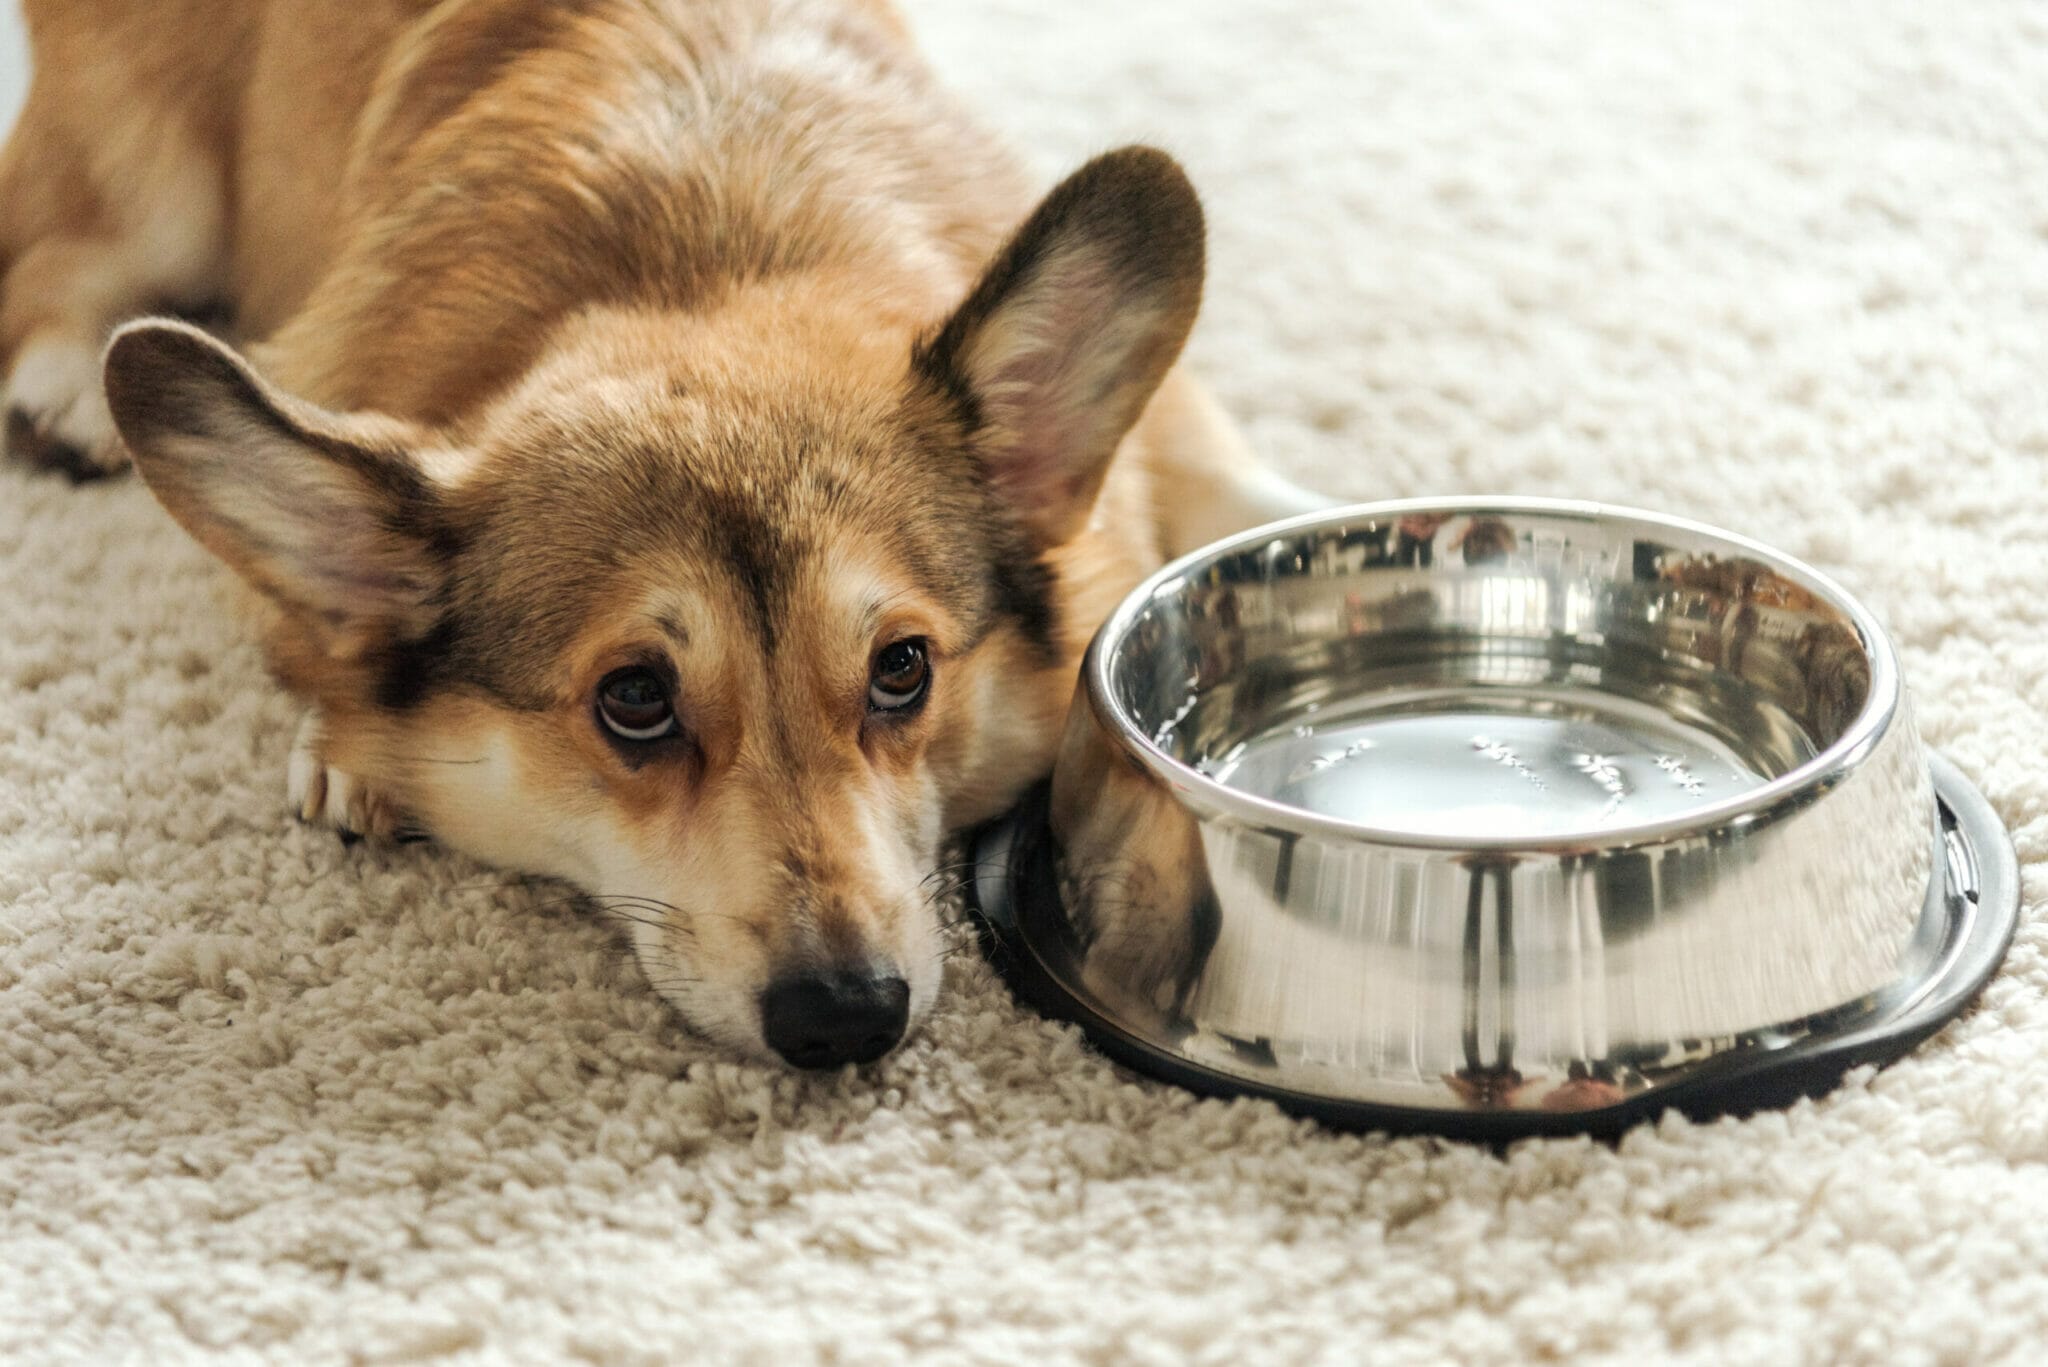 How long can your dog go without drinking water?